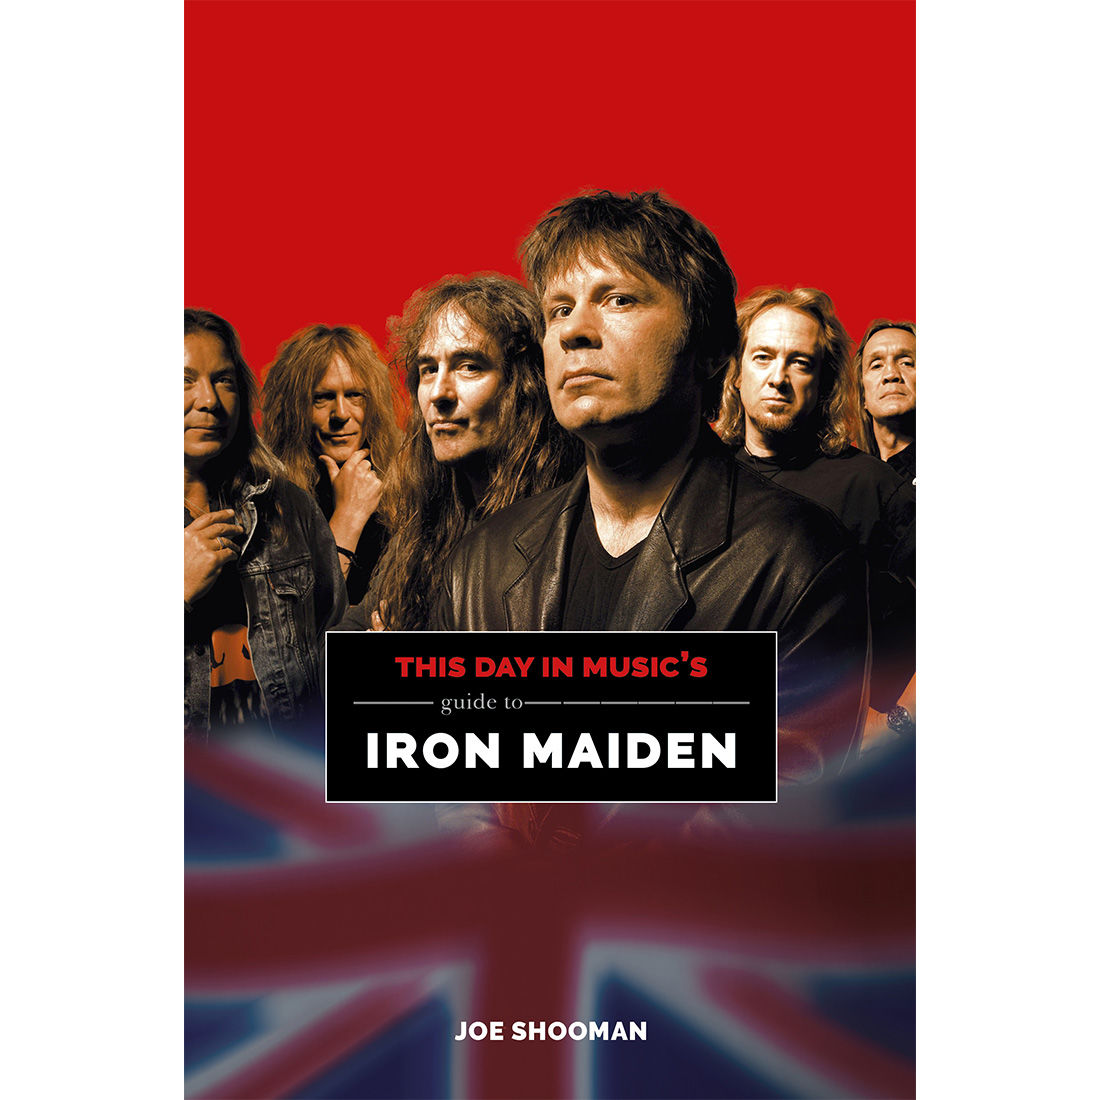 This Day In Music - This Day in Music Guide to Iron Maiden: Paperback Edition Book